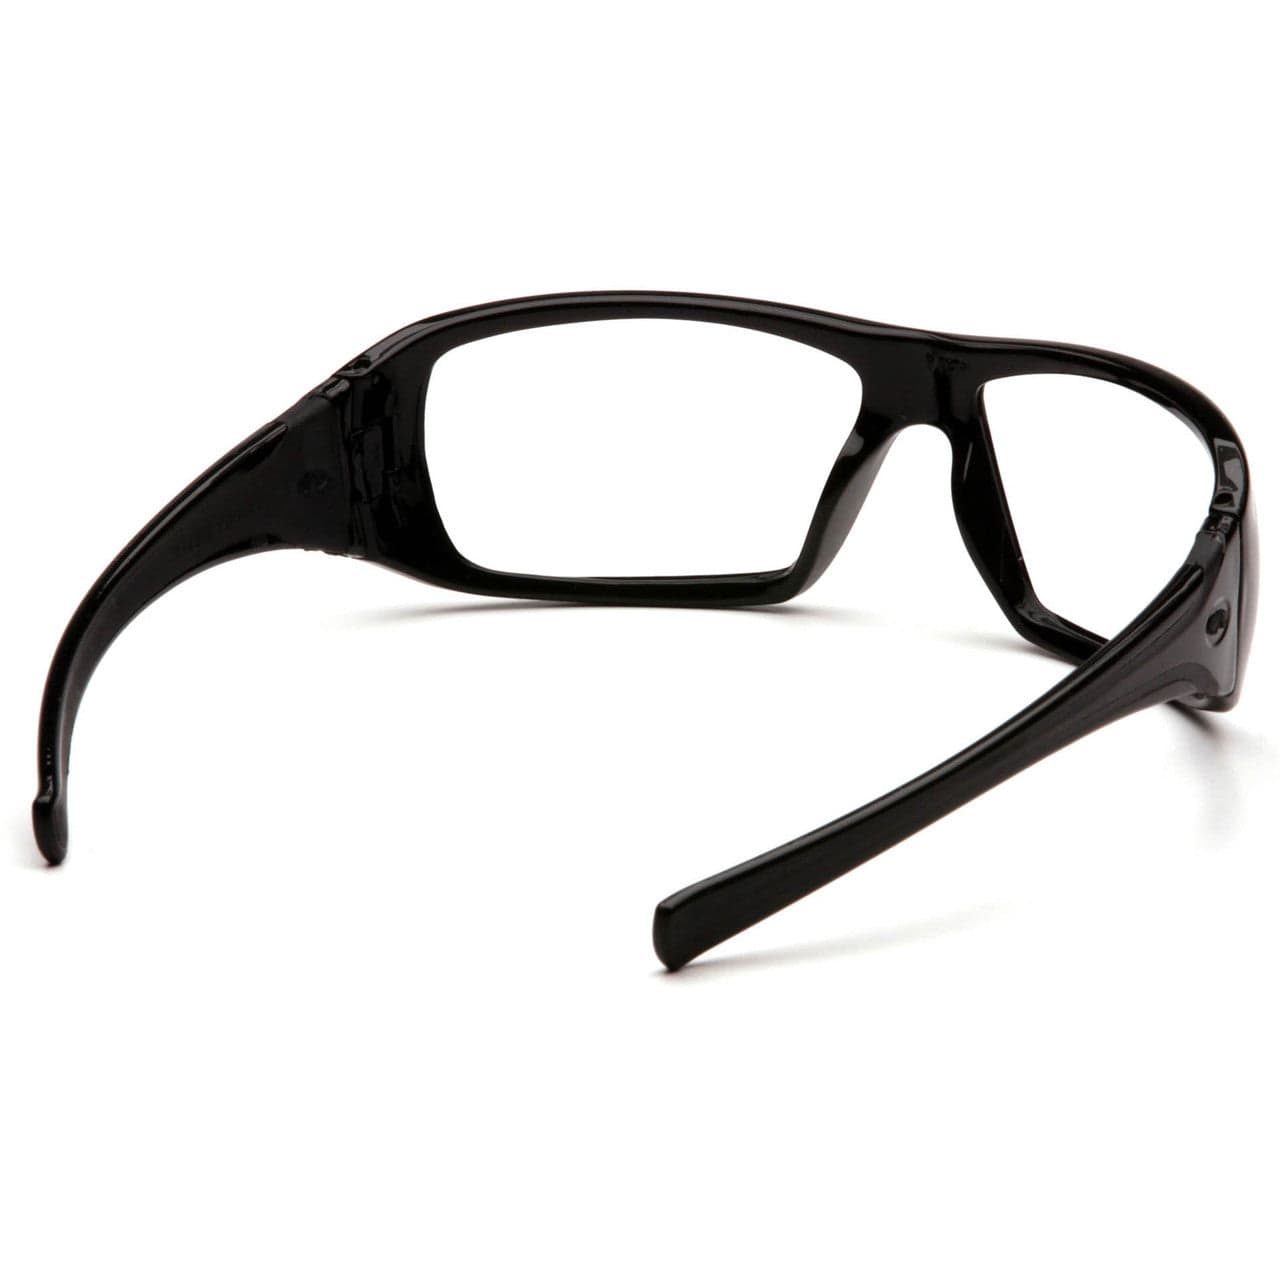 Pyramex Goliath Safety Glasses with Black Frame and Clear Lens SB5610D Inside View